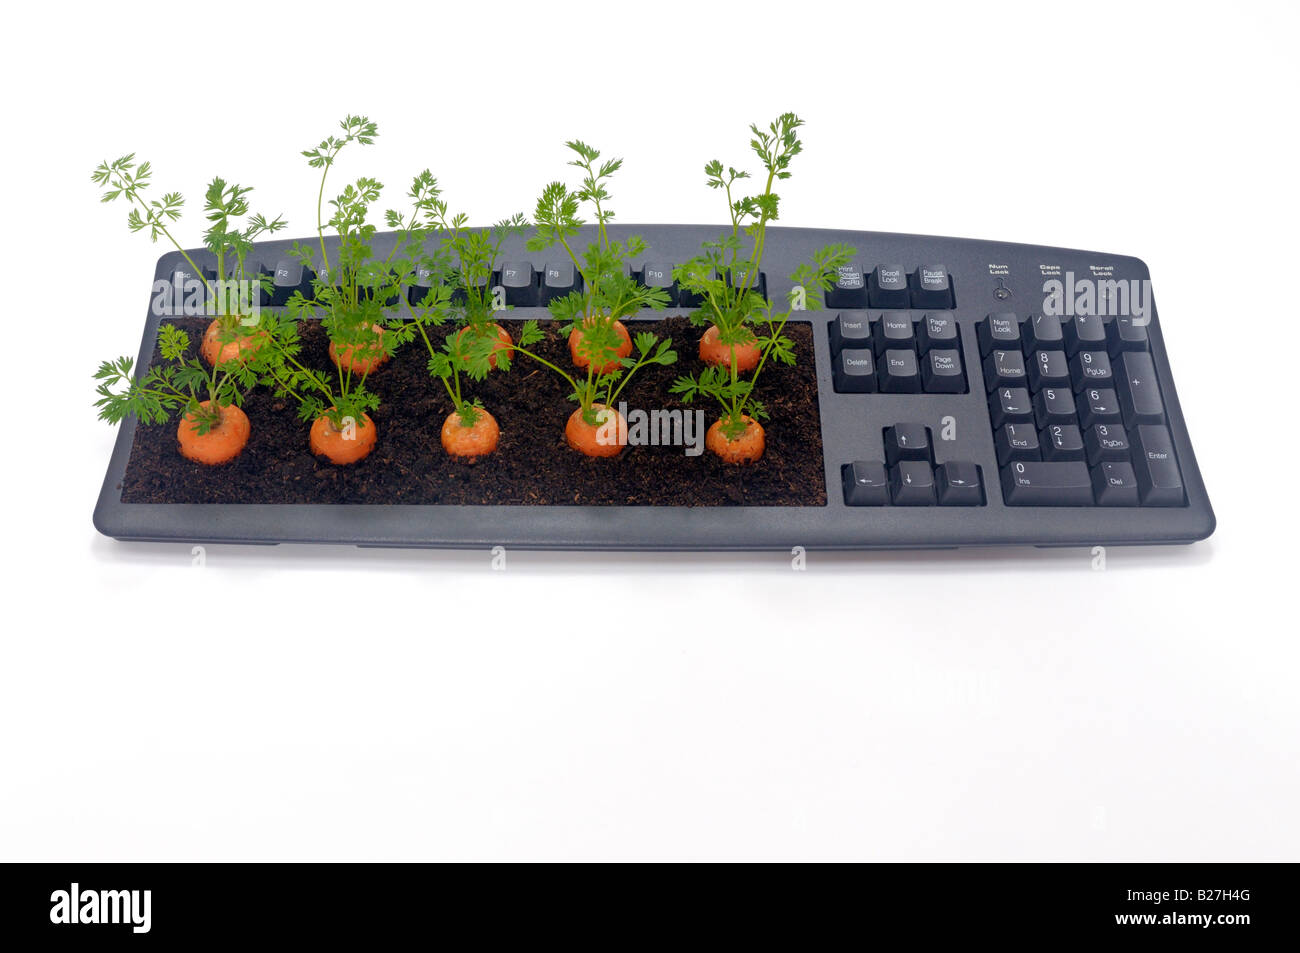 A desktop computer keyboard with carrots growing through the keyboard Stock Photo